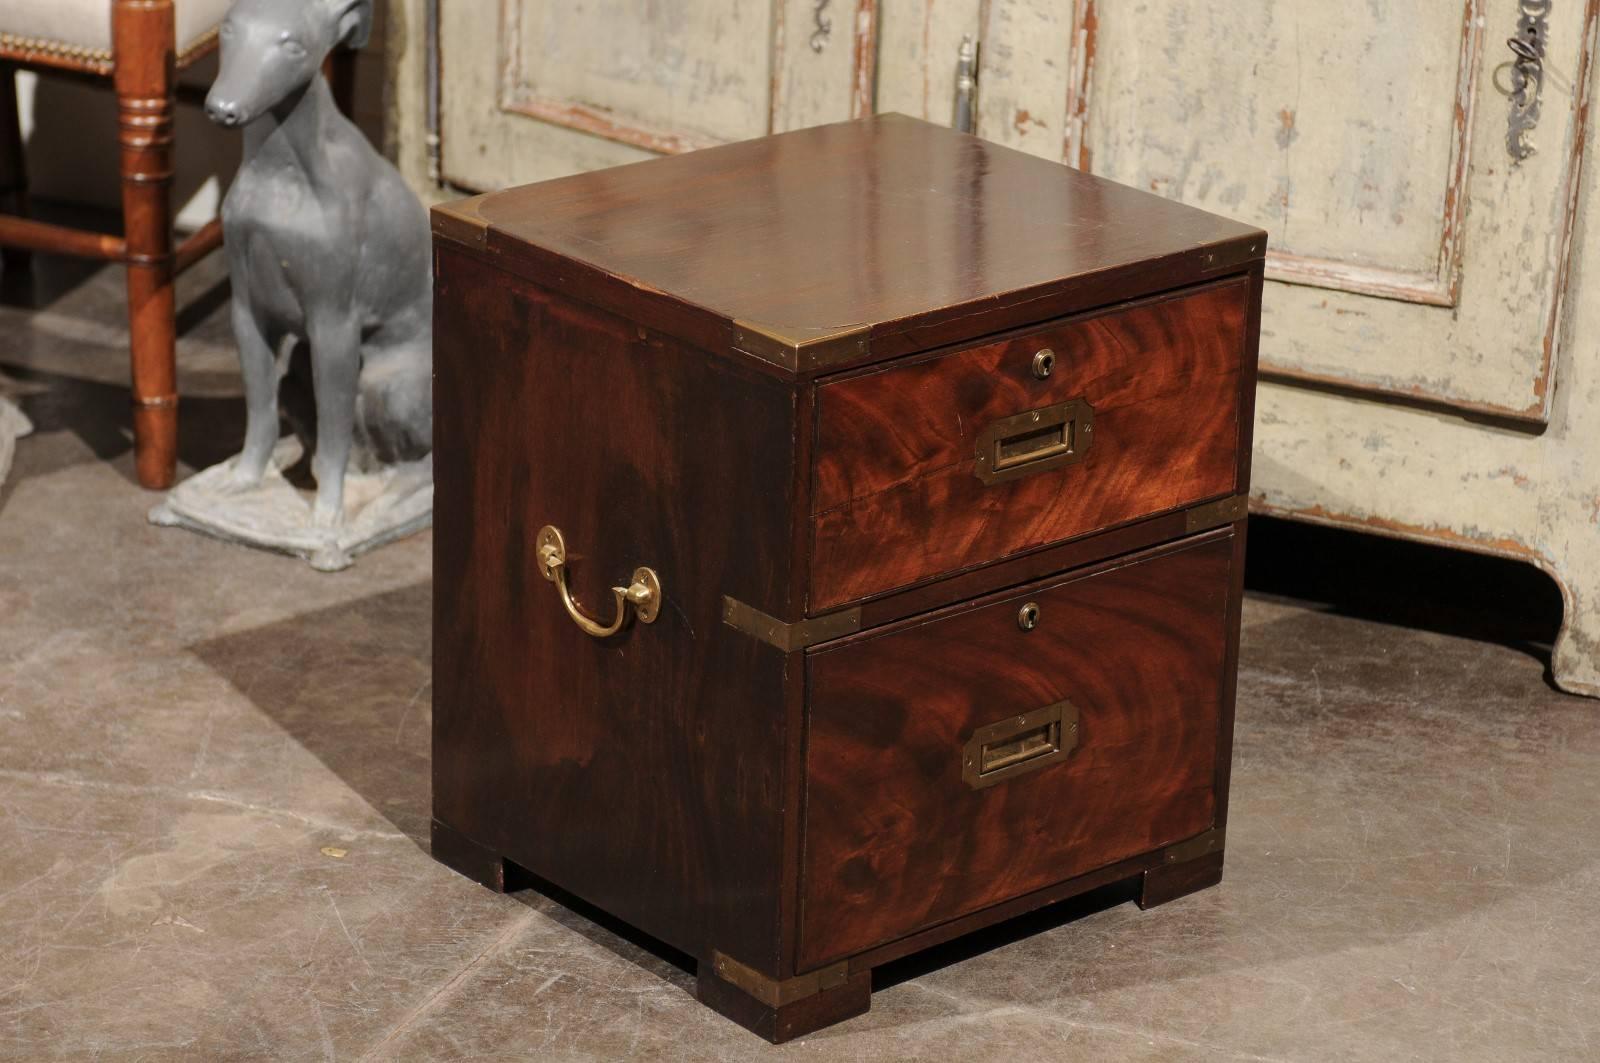 An English Campaign petite flaming mahogany chest / box with brass fittings from the late 19th century. This English box features a simple, linear frame, stylishly accented by brass fittings on the surround. The two dovetailed drawers in the front